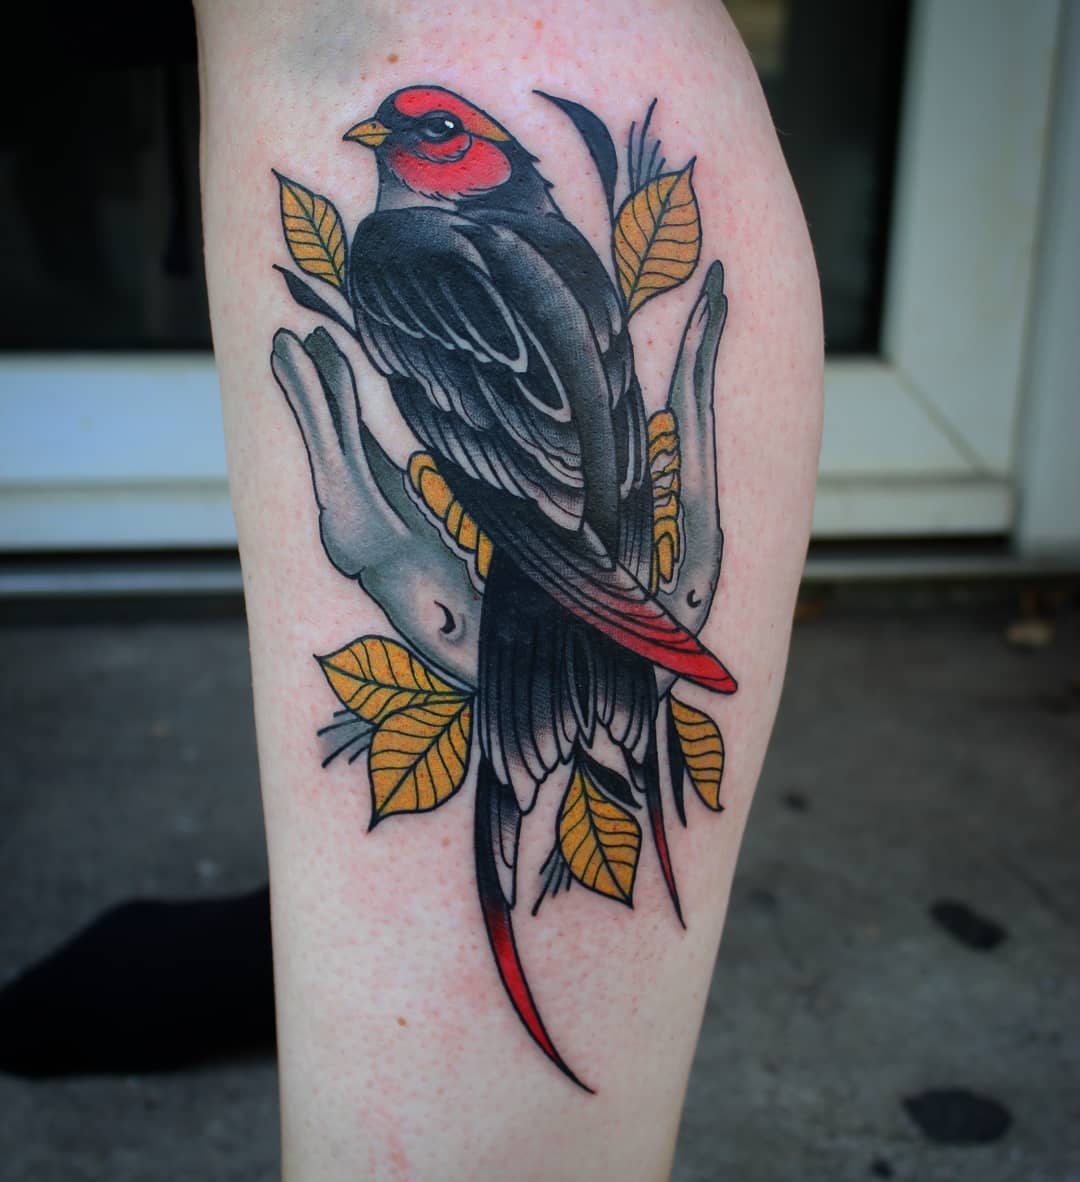 Little swallow from today. Thanky you Katharina!
#germantattooers #germanartist